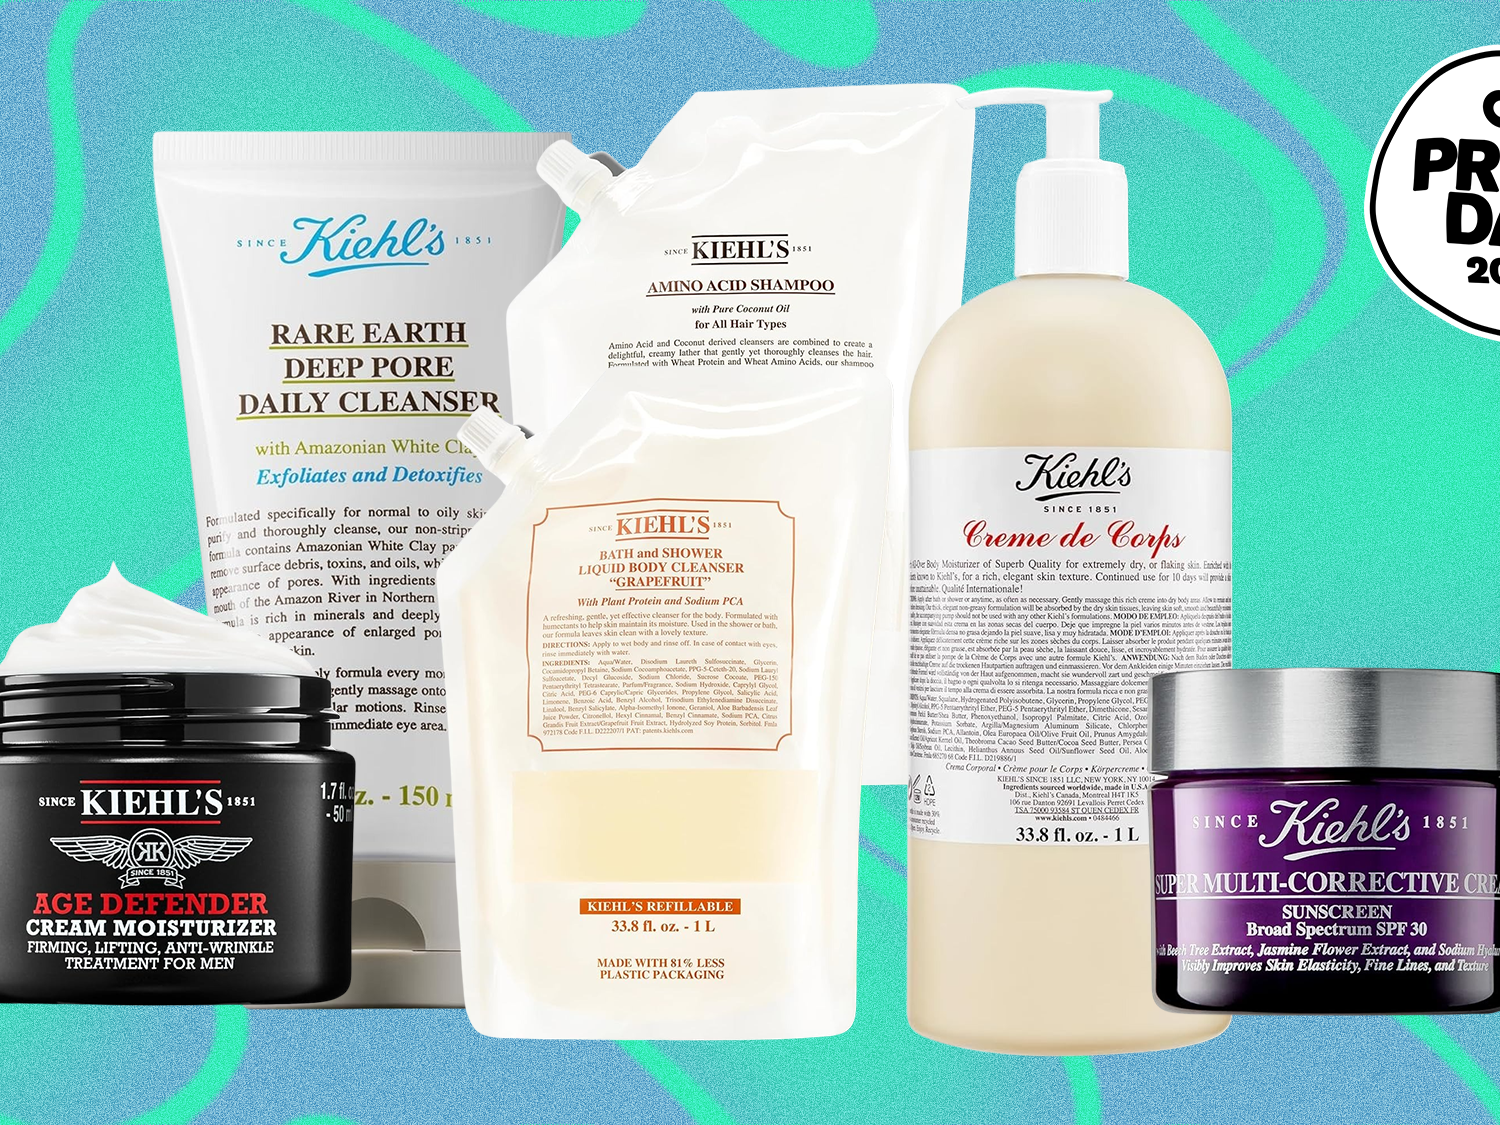 Kiehl's Prime Day Deals Are Not to Be Missed